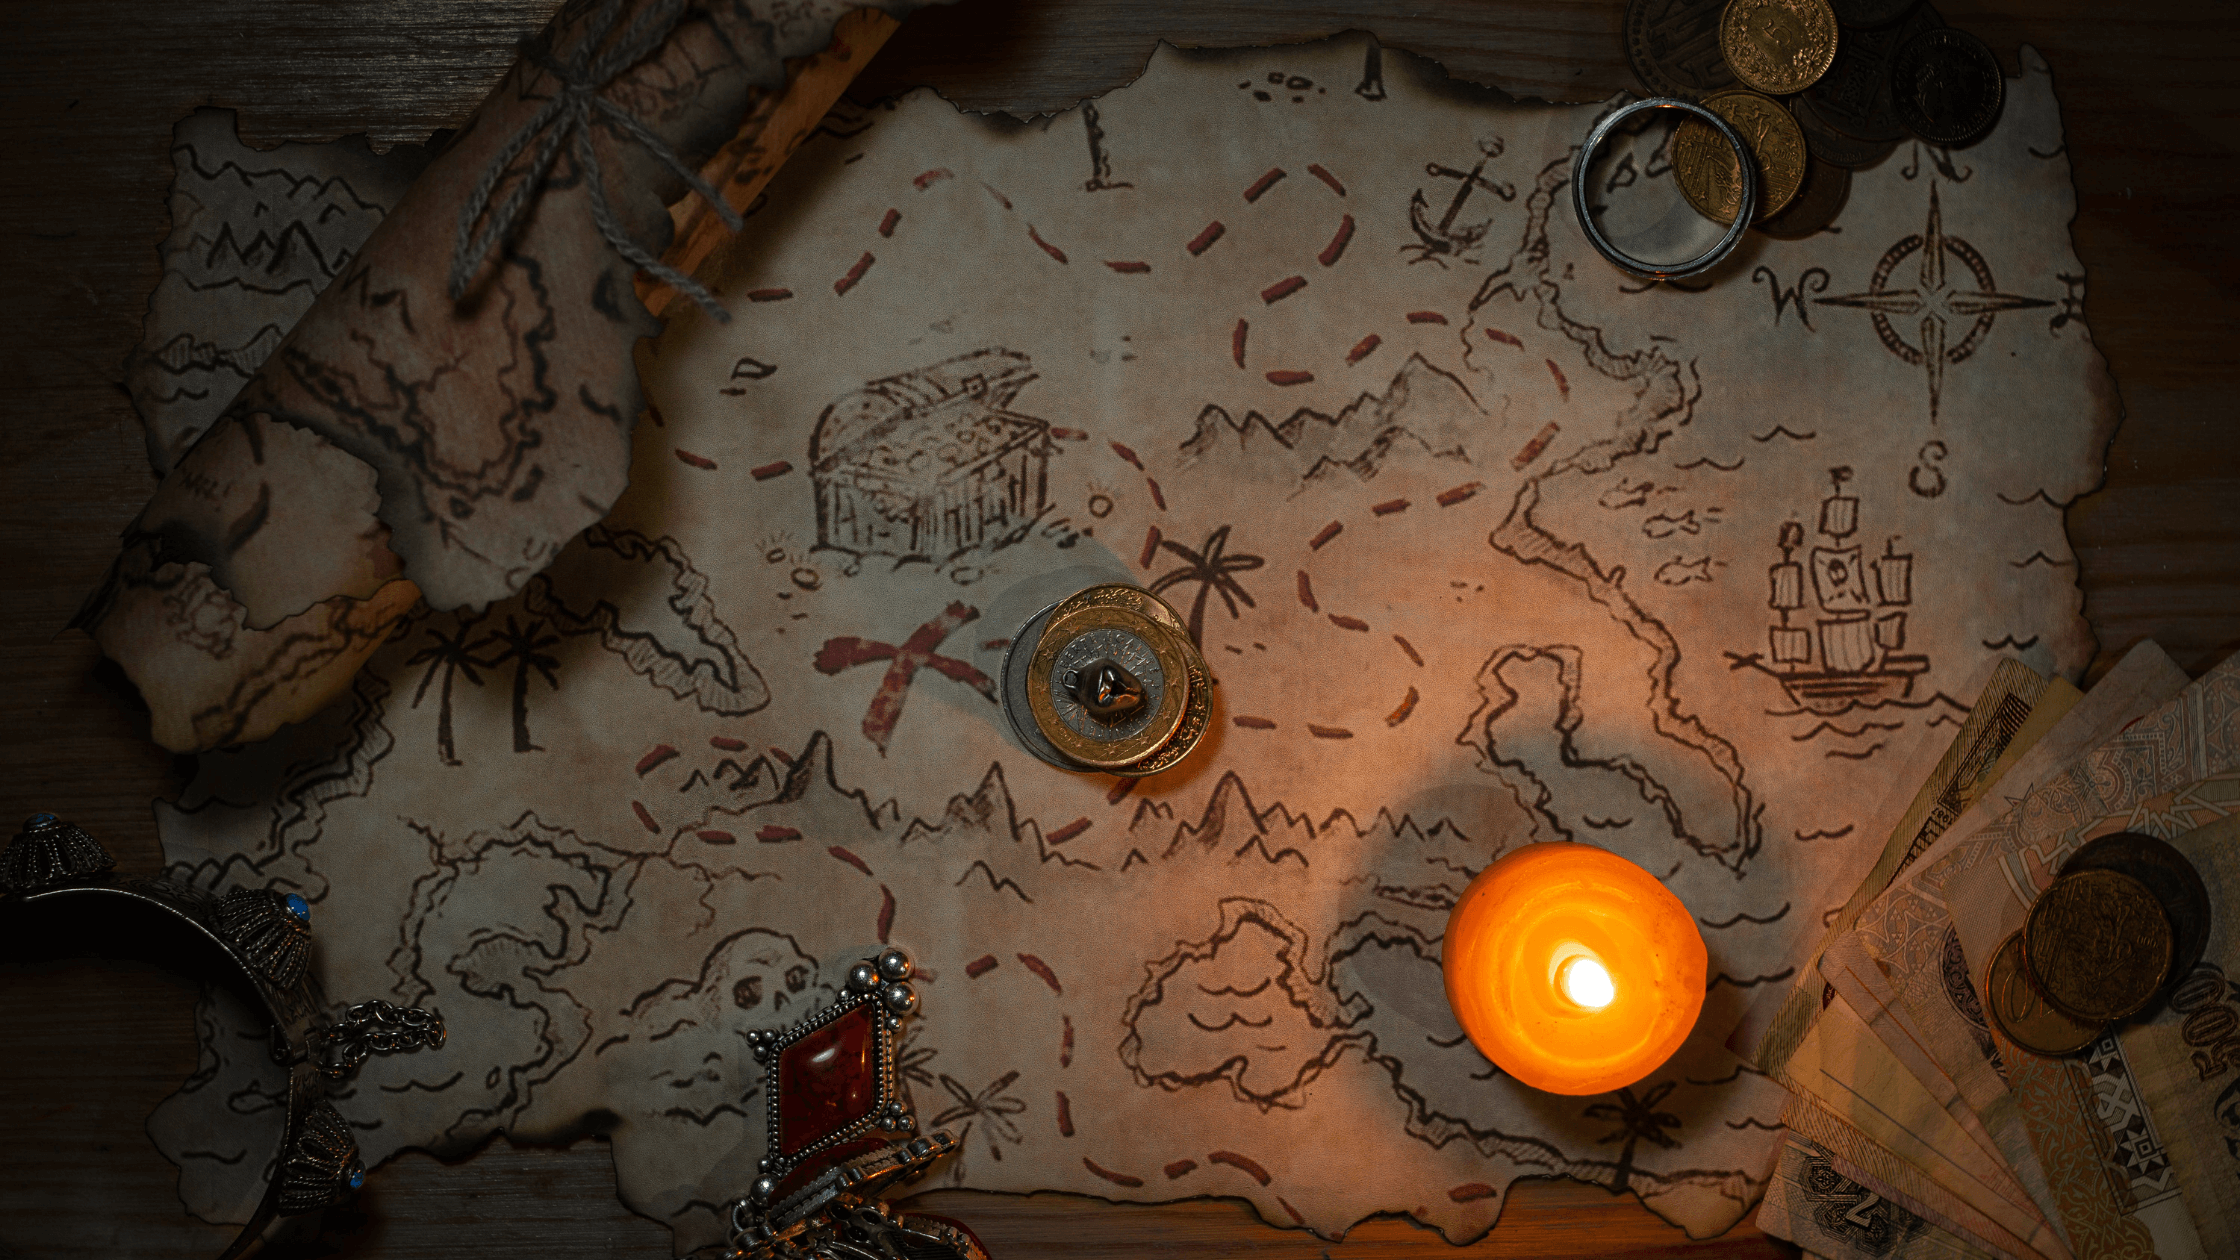 Treasure map with a small candle on top